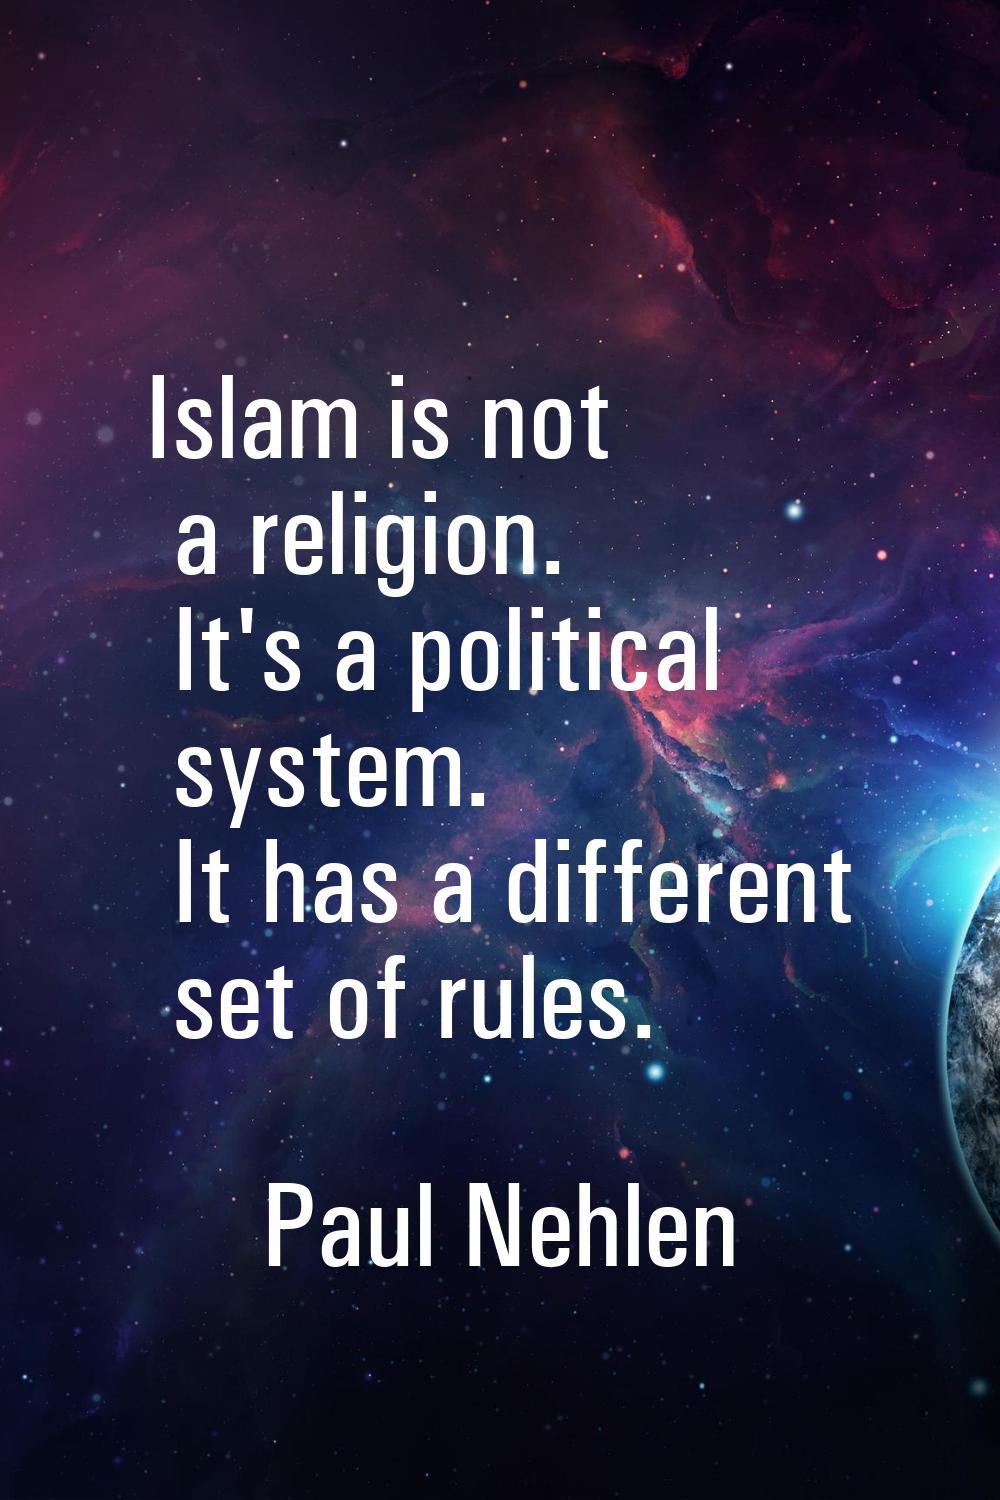 Islam is not a religion. It's a political system. It has a different set of rules.